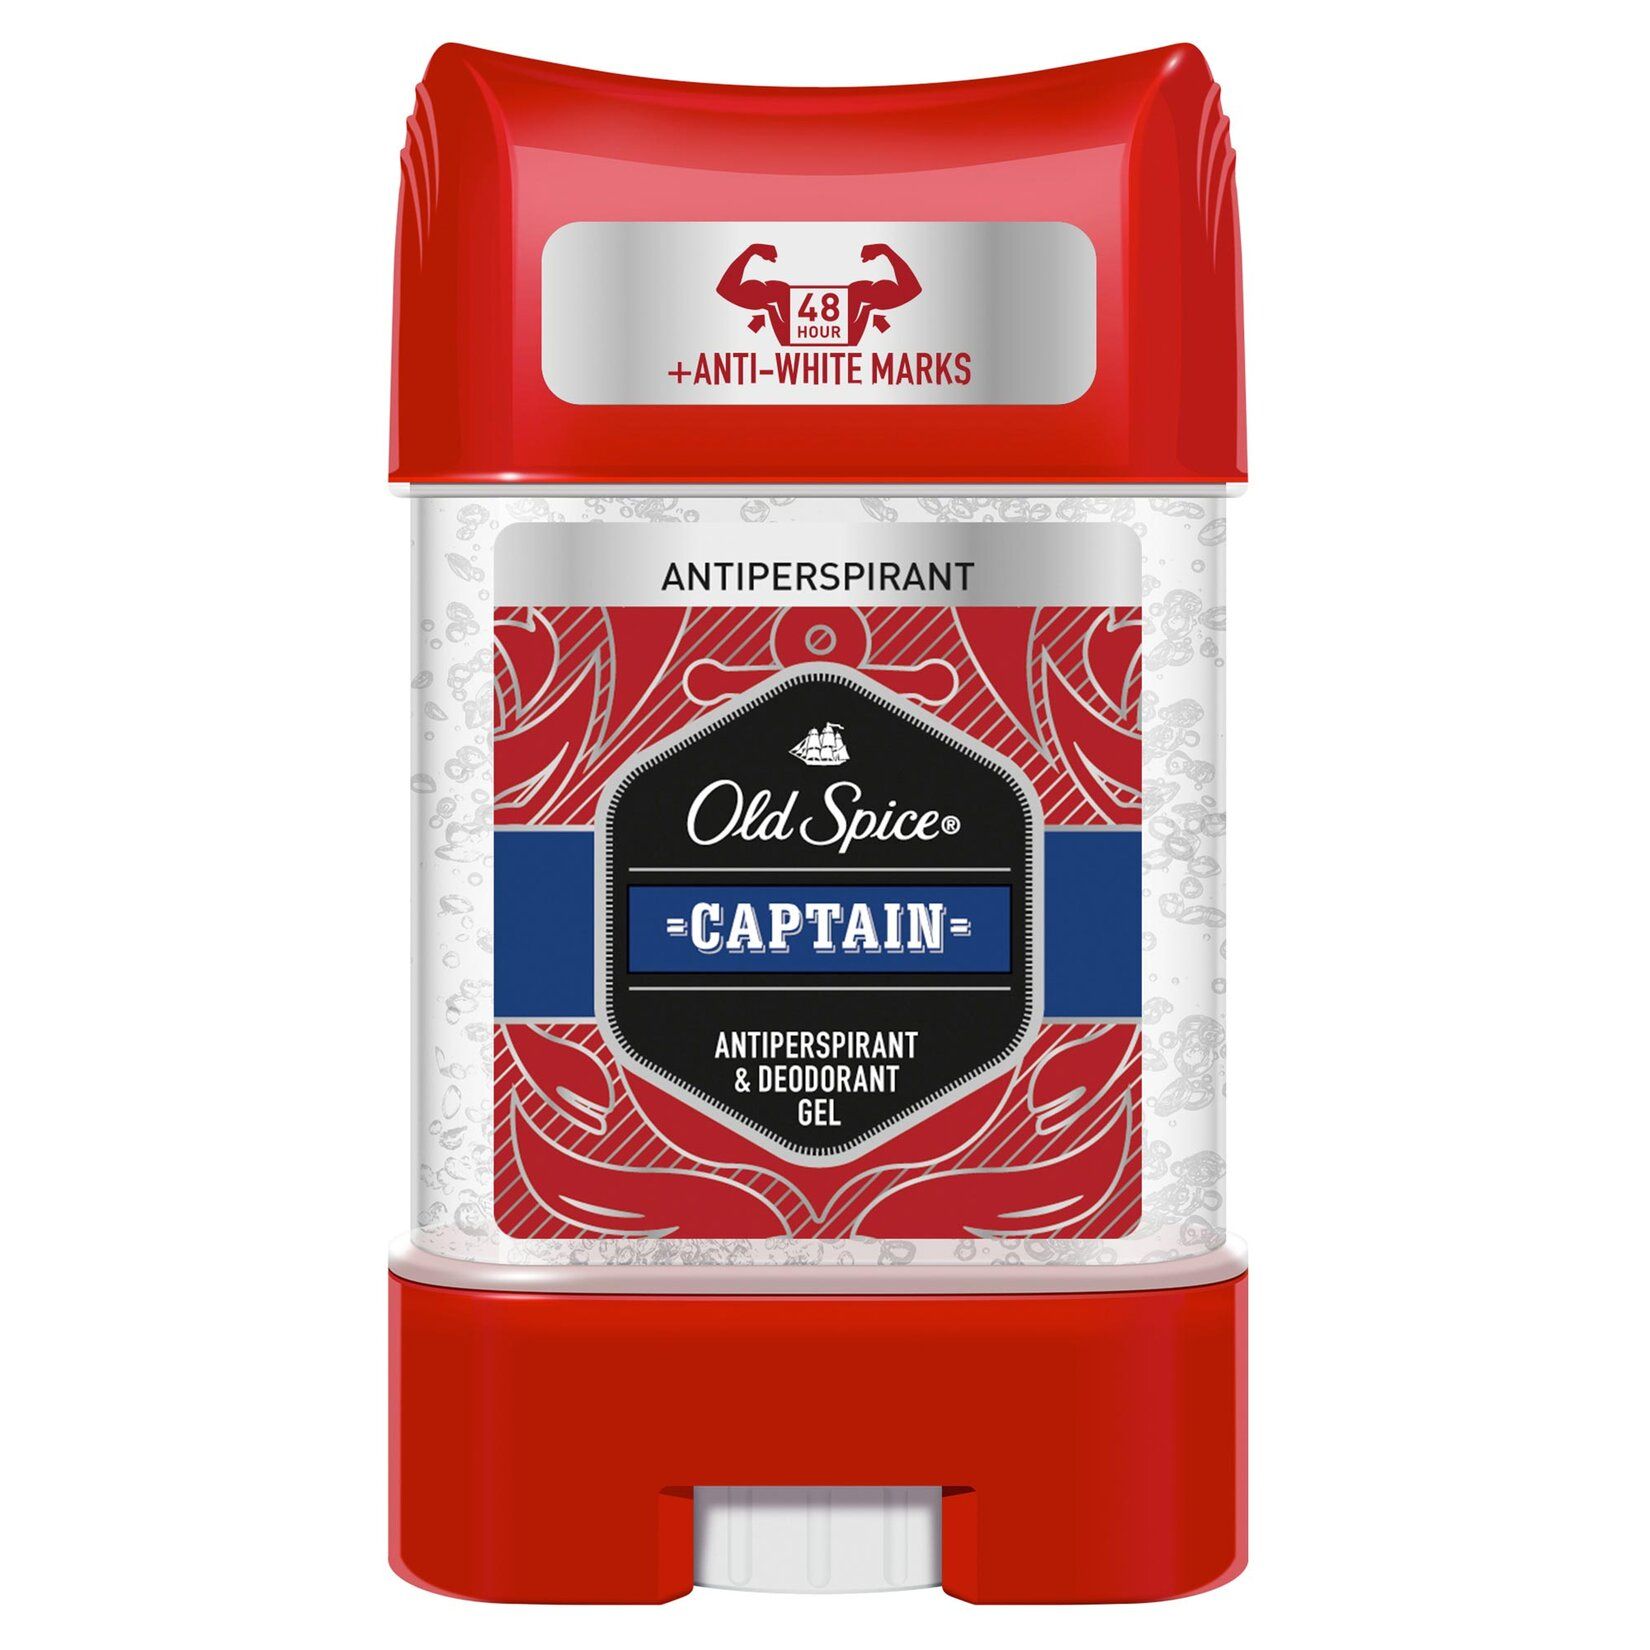 OLD SPICE CLEAR JEL CAPTAIN 70 ML